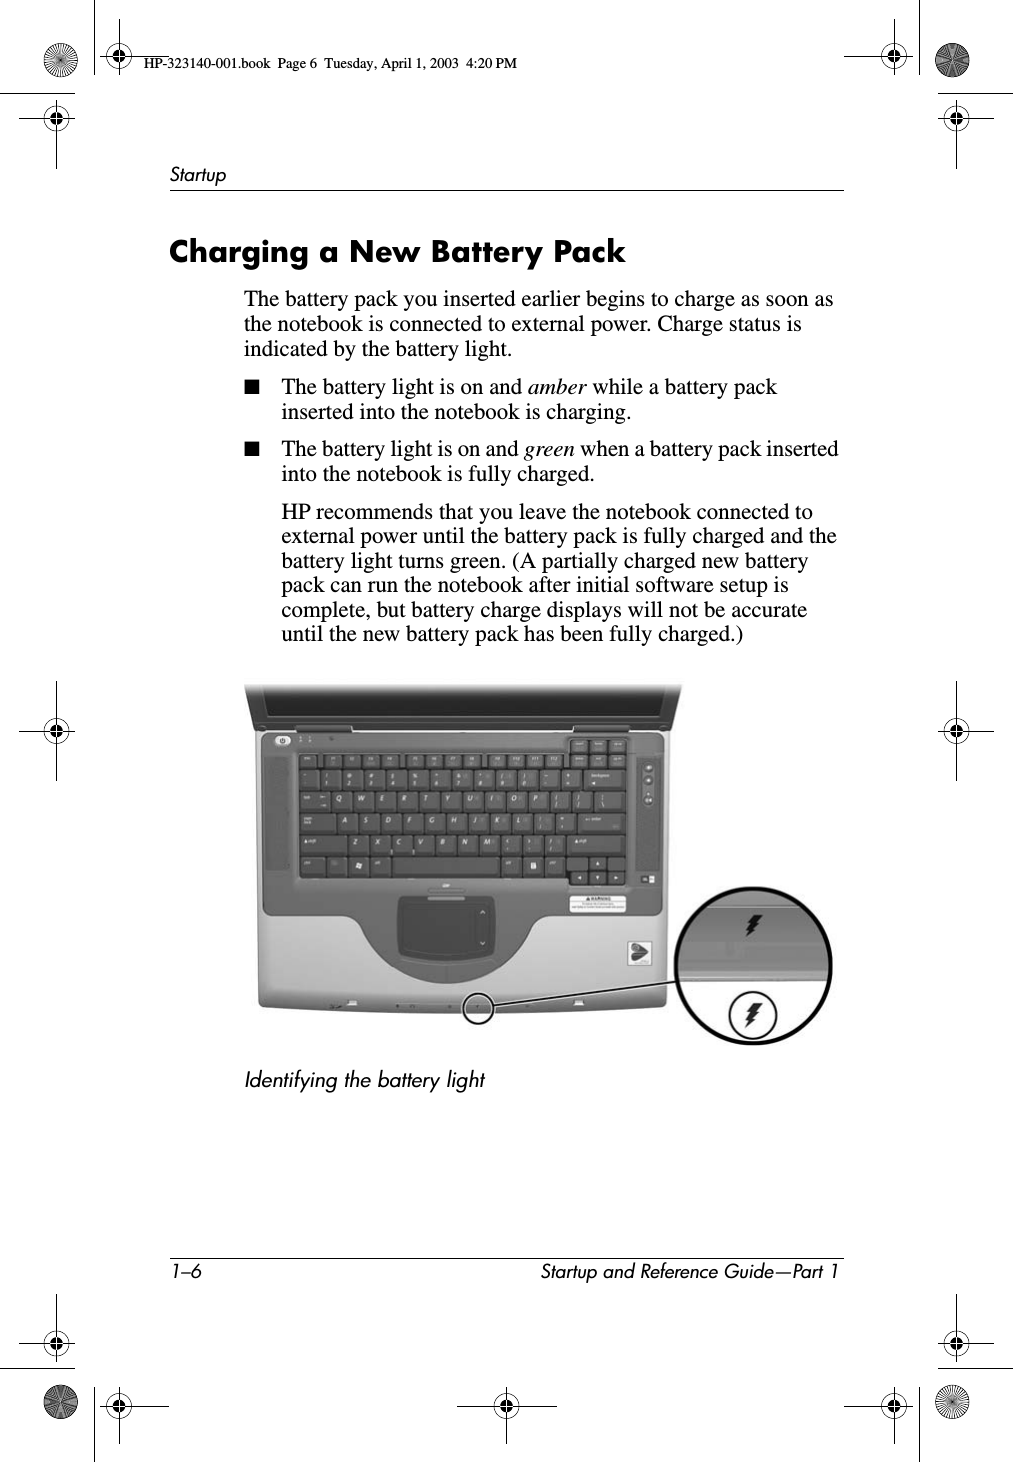 1–6 Startup and Reference Guide—Part 1StartupCharging a New Battery PackThe battery pack you inserted earlier begins to charge as soon as the notebook is connected to external power. Charge status is indicated by the battery light.■The battery light is on and amber while a battery pack inserted into the notebook is charging. ■The battery light is on and green when a battery pack inserted into the notebook is fully charged.HP recommends that you leave the notebook connected to external power until the battery pack is fully charged and the battery light turns green. (A partially charged new battery pack can run the notebook after initial software setup is complete, but battery charge displays will not be accurate until the new battery pack has been fully charged.)Identifying the battery lightHP-323140-001.book  Page 6  Tuesday, April 1, 2003  4:20 PM